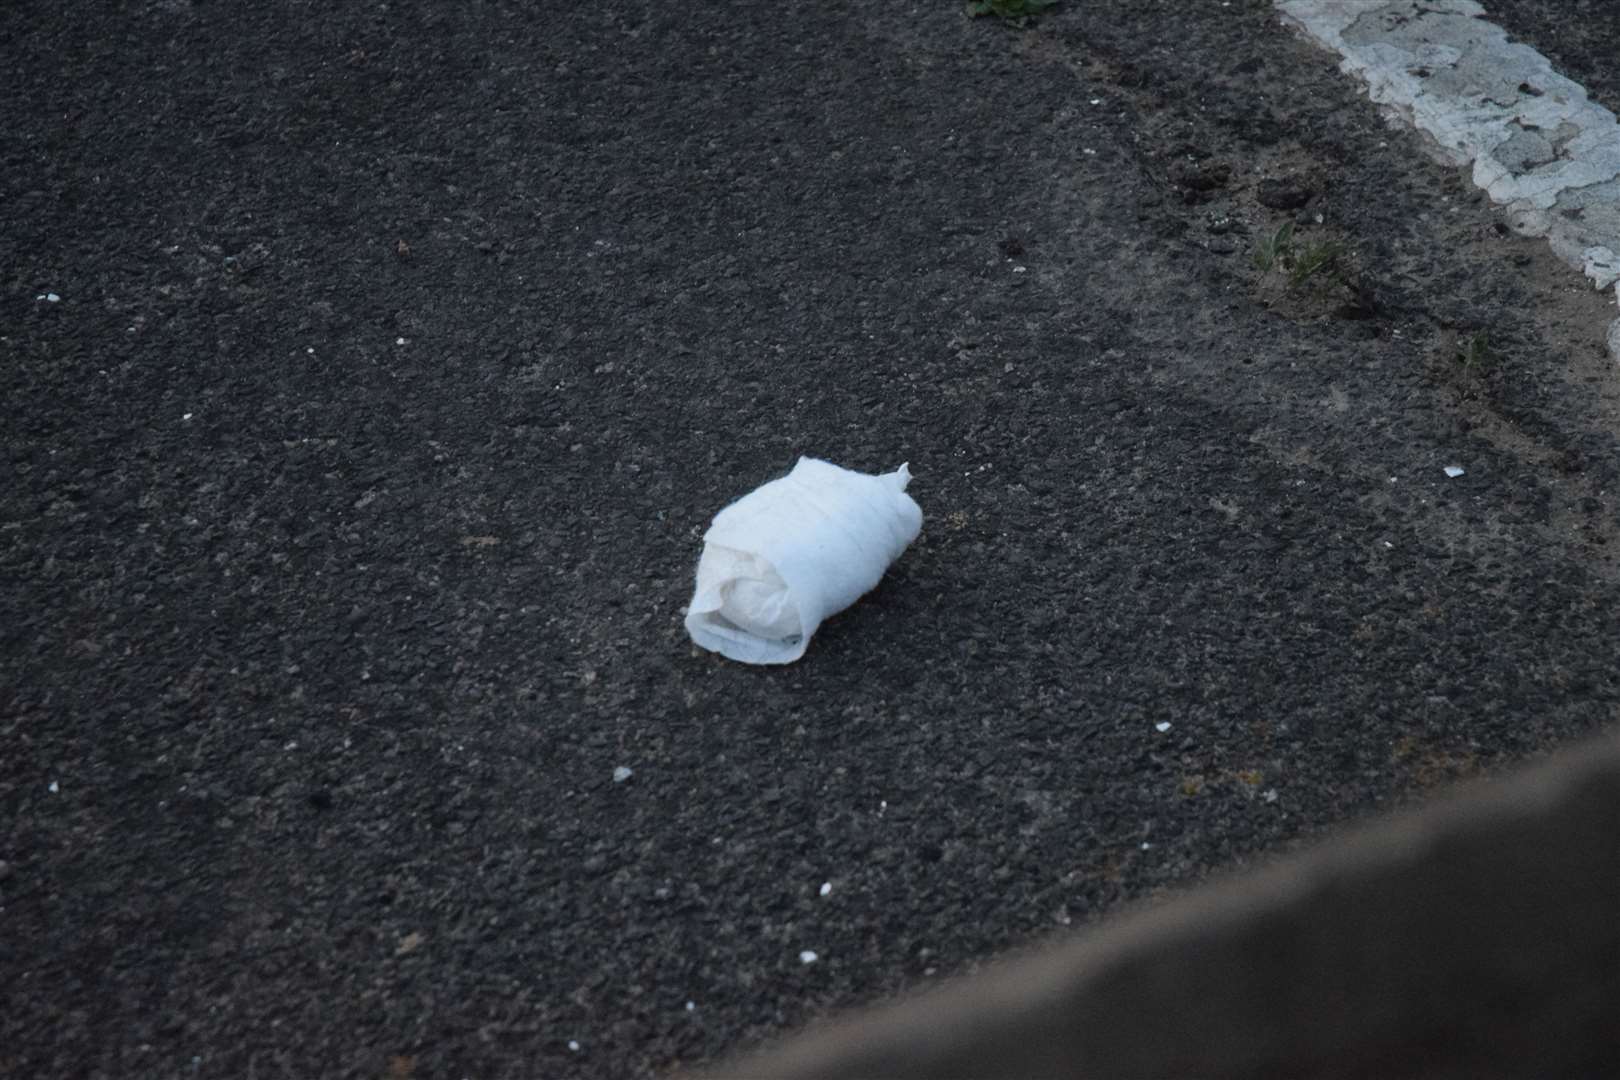 A nappy left in the street Picture: Pd Photography